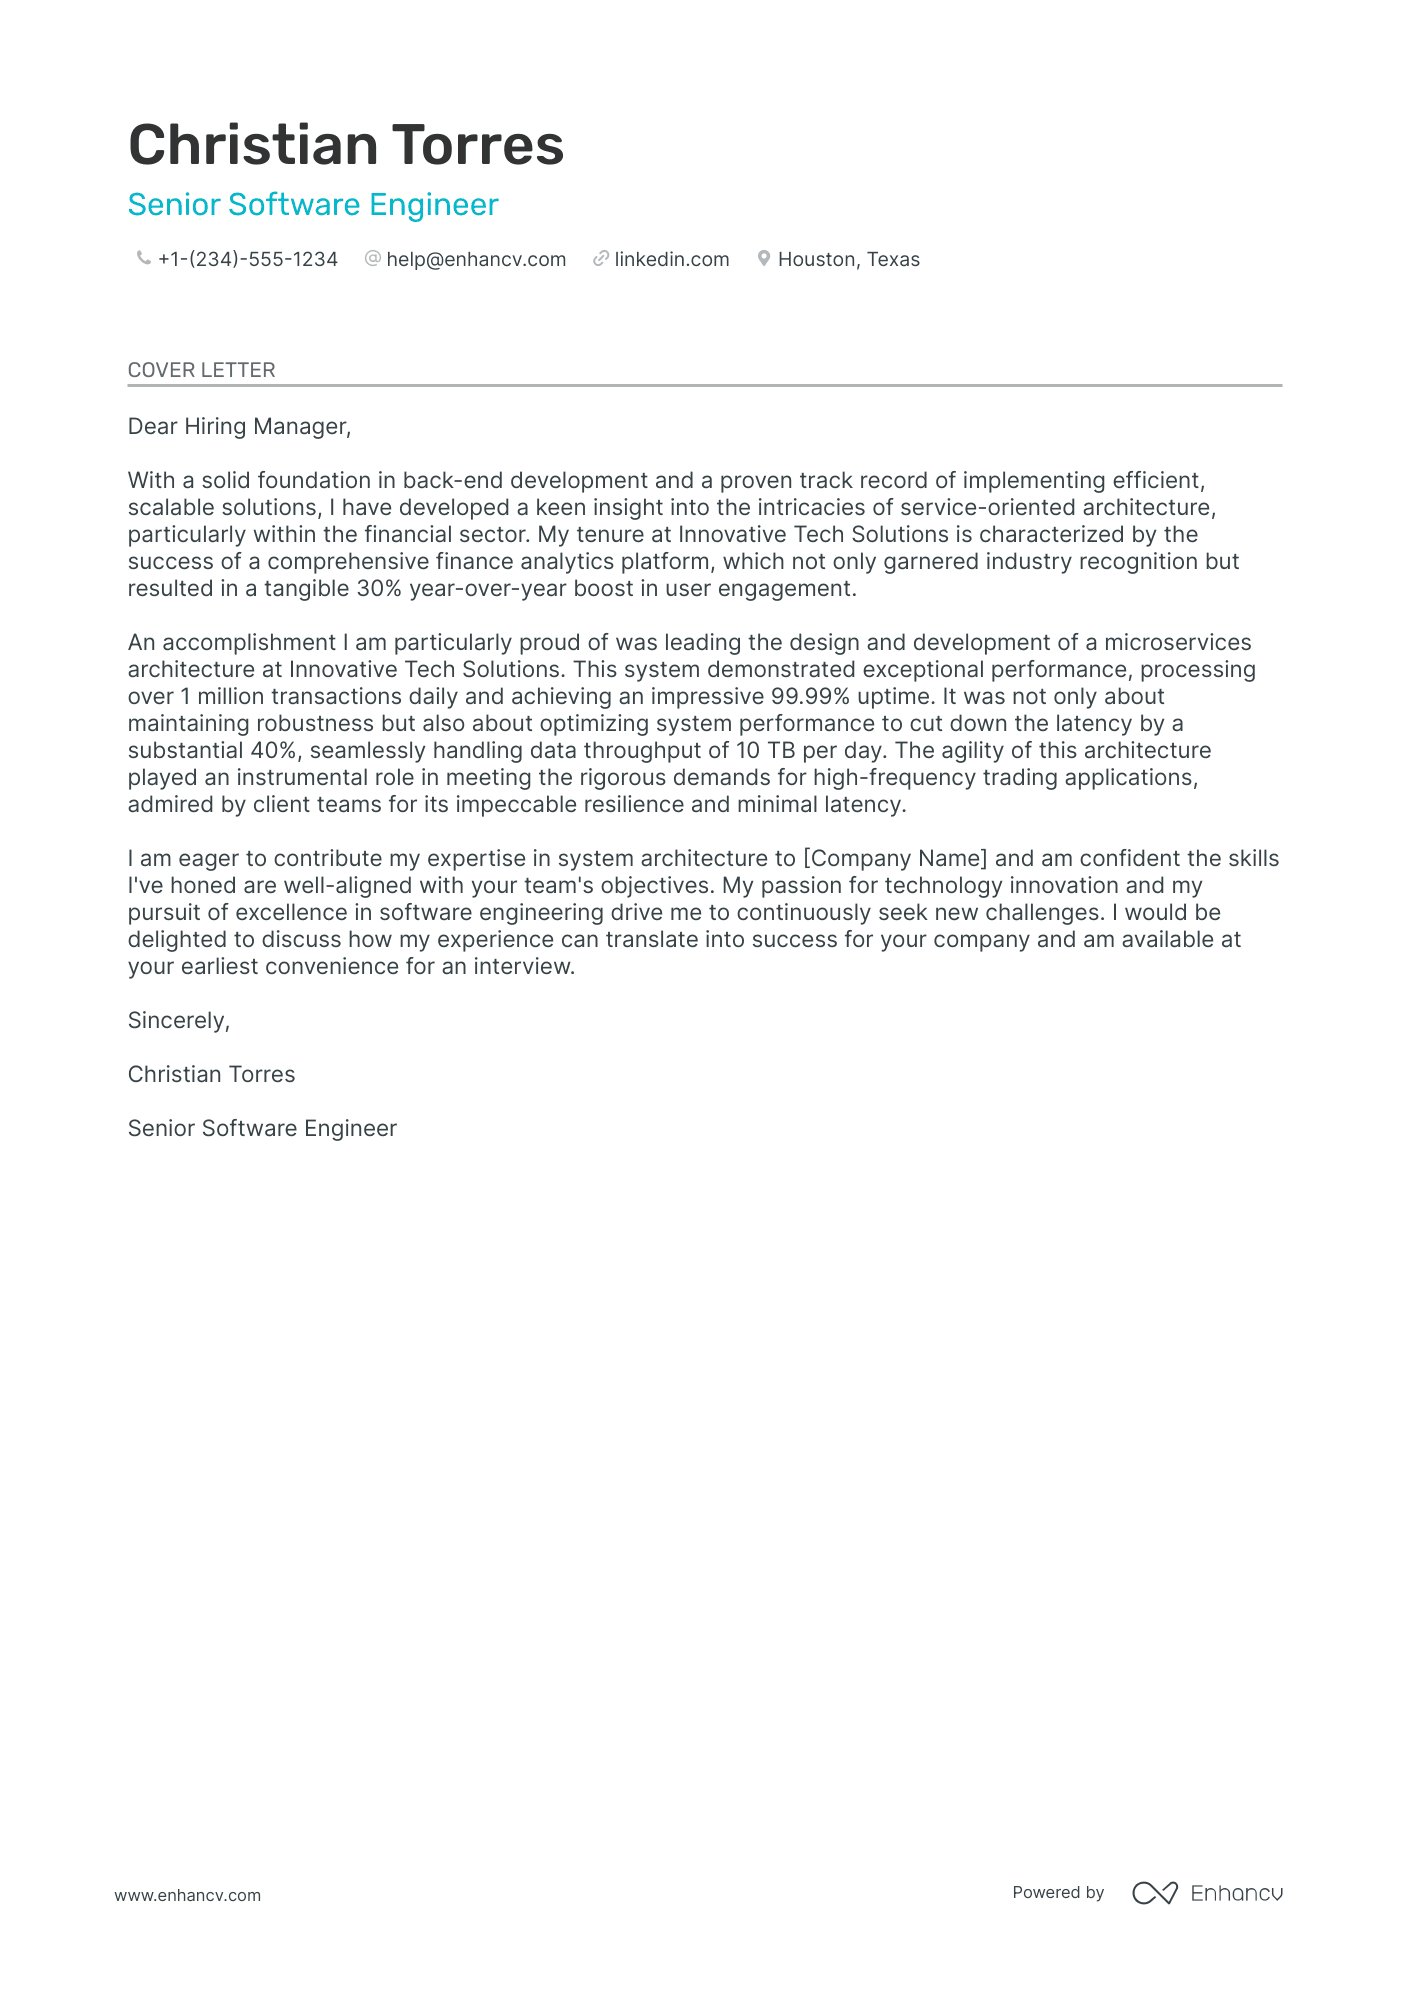 Gym cover letter